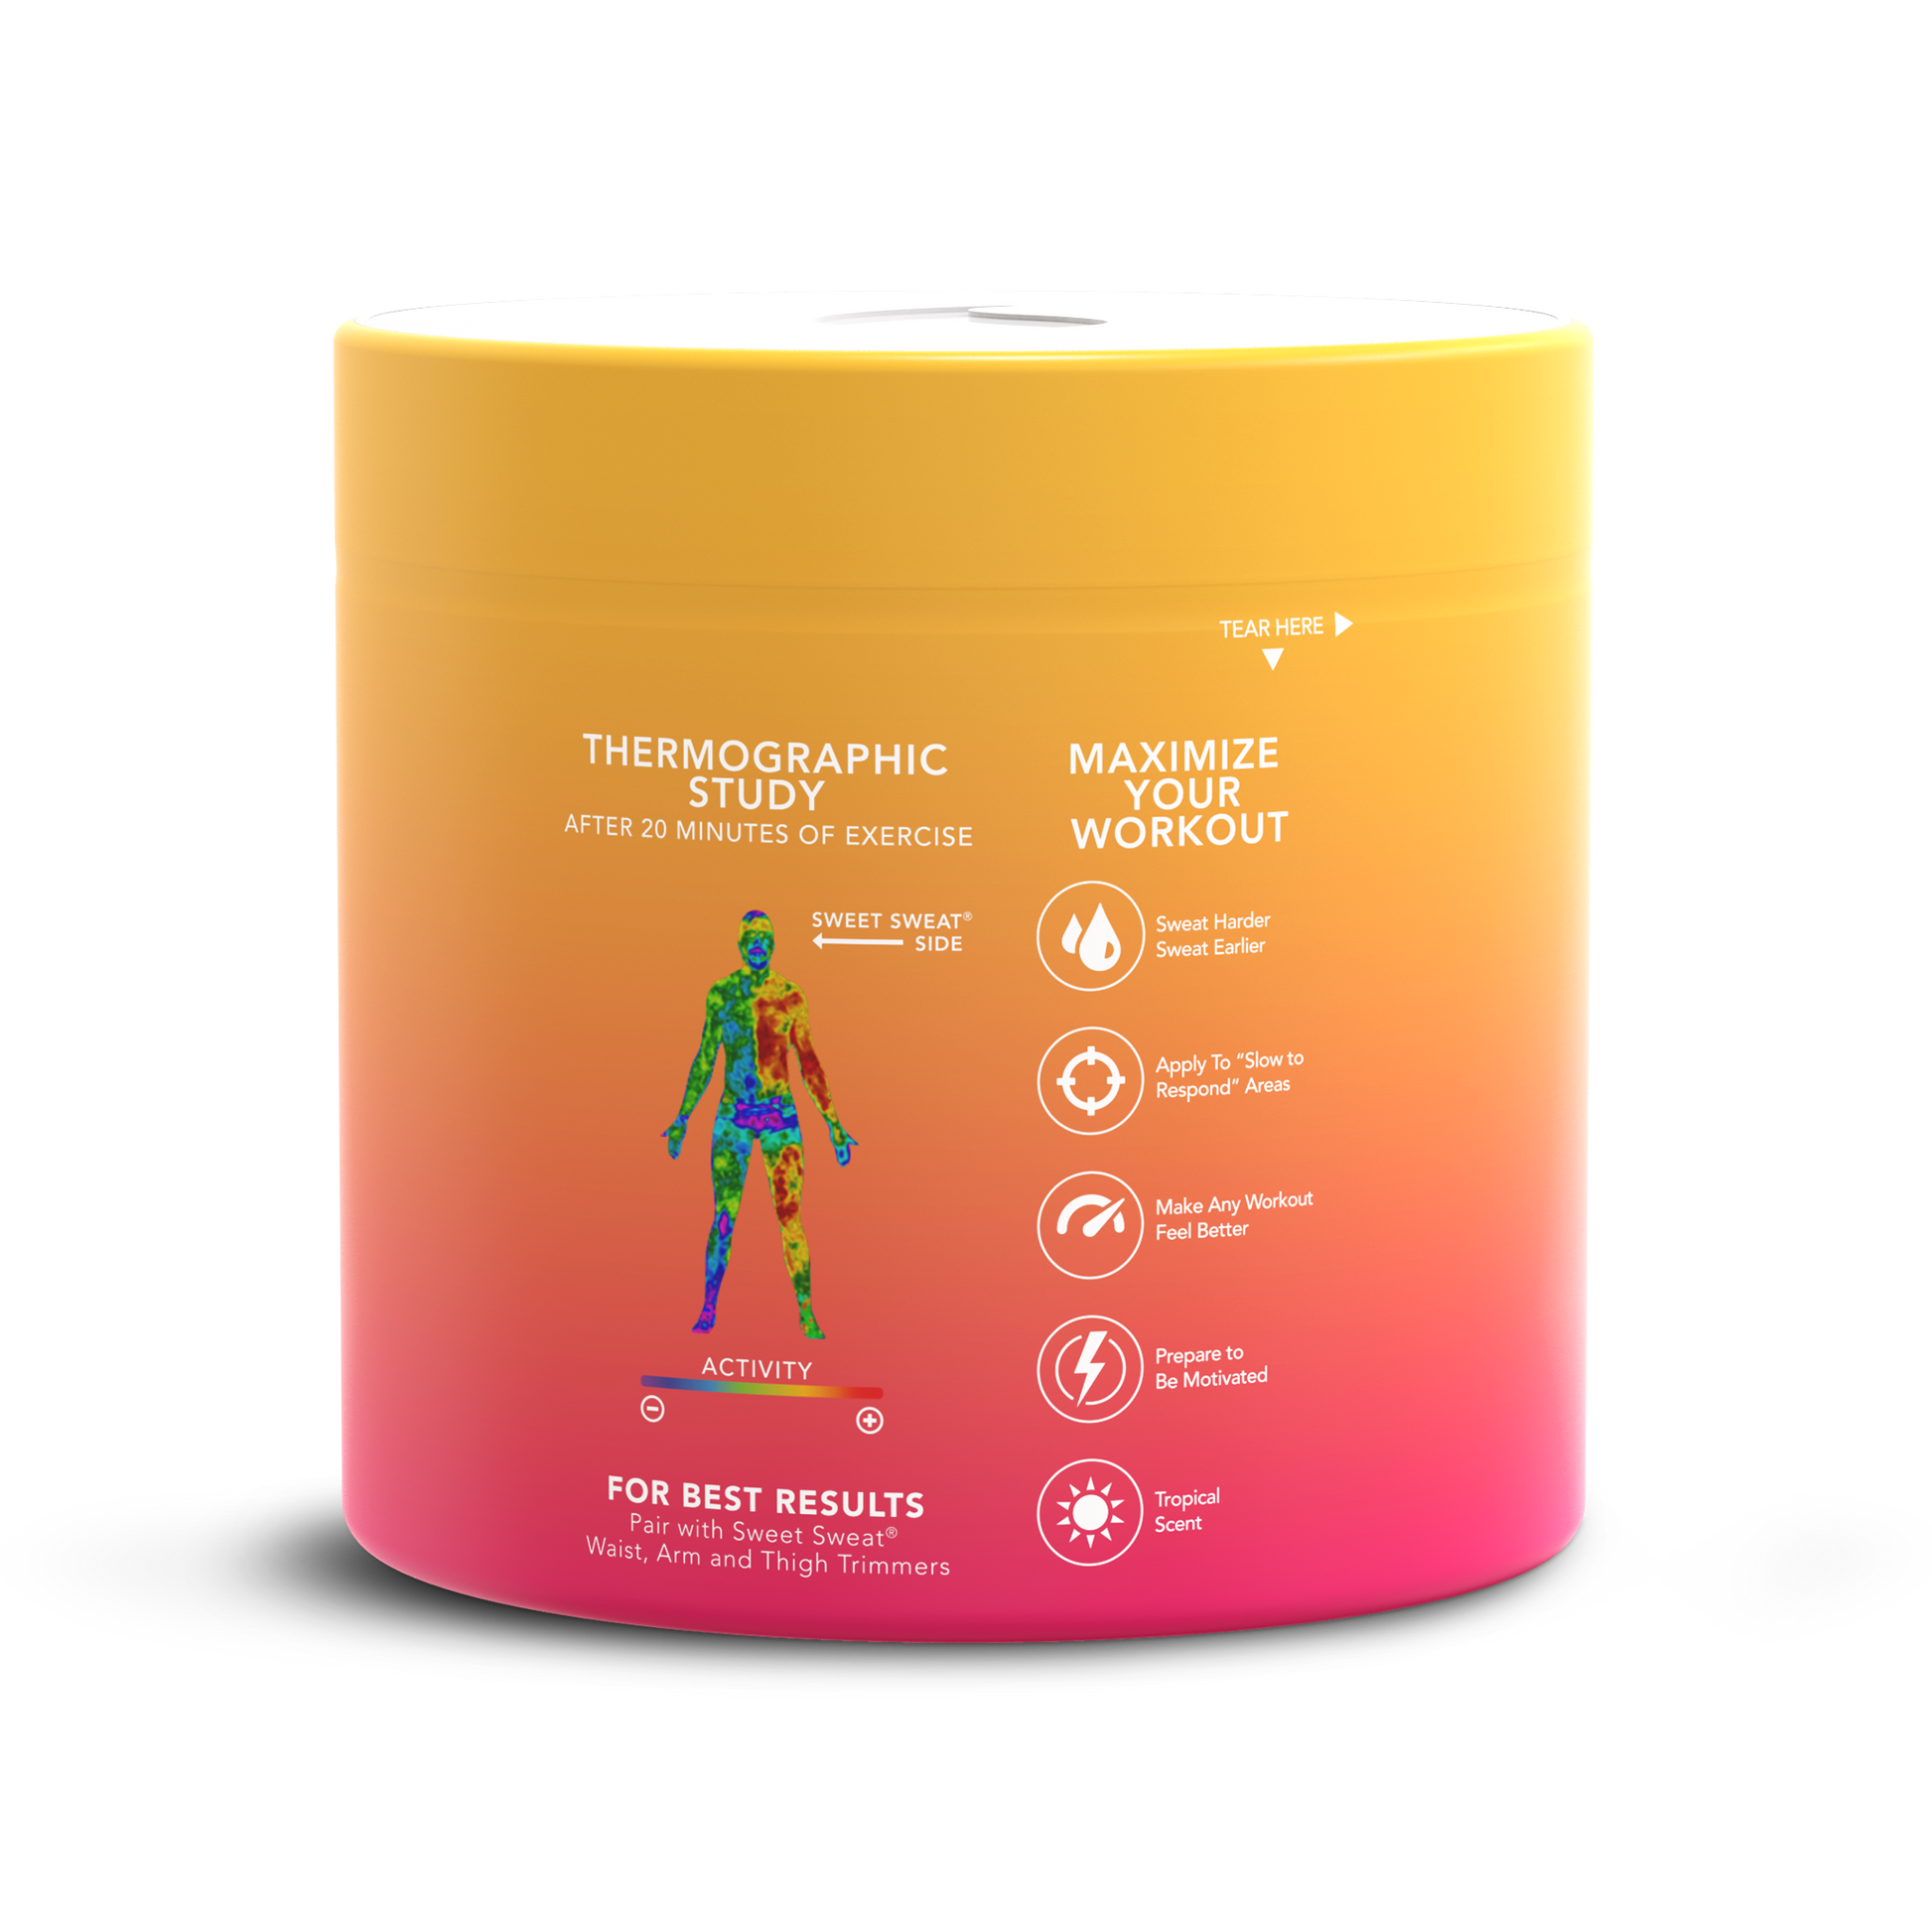 a Sweet Sweat® Jar Topical Gel 13.5 oz with an image of a human body.